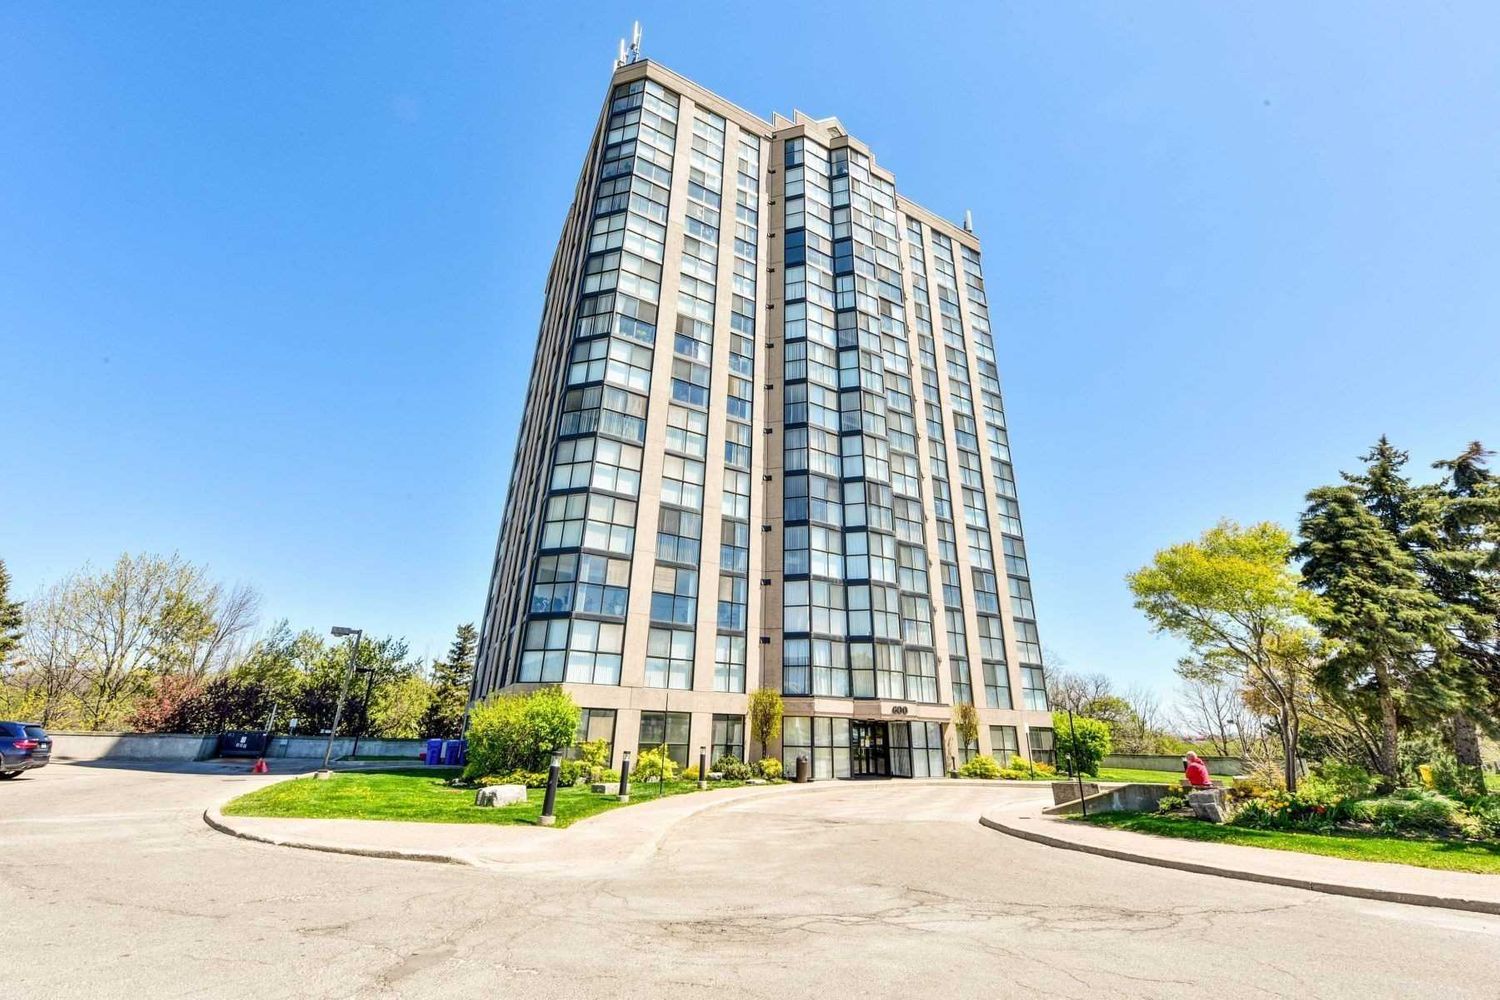 600 Rexdale Boulevard. Riverpark Residences is located in  Etobicoke, Toronto - image #1 of 3